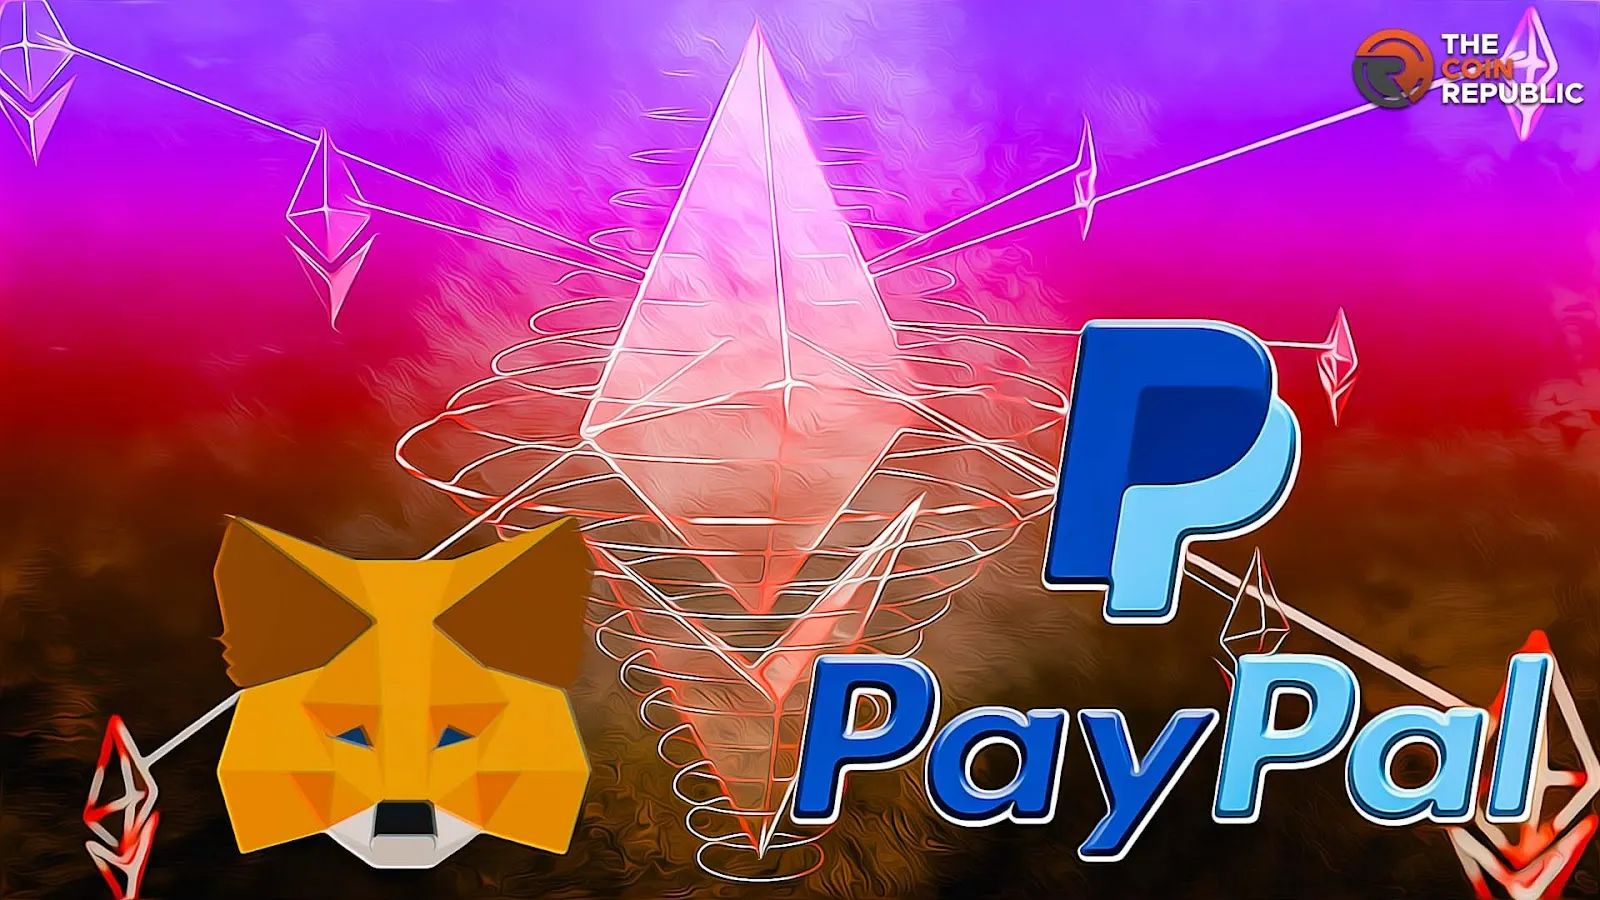 MetaMask and PayPal Giving U.S. Users A Chance to Buy ‘ETH’